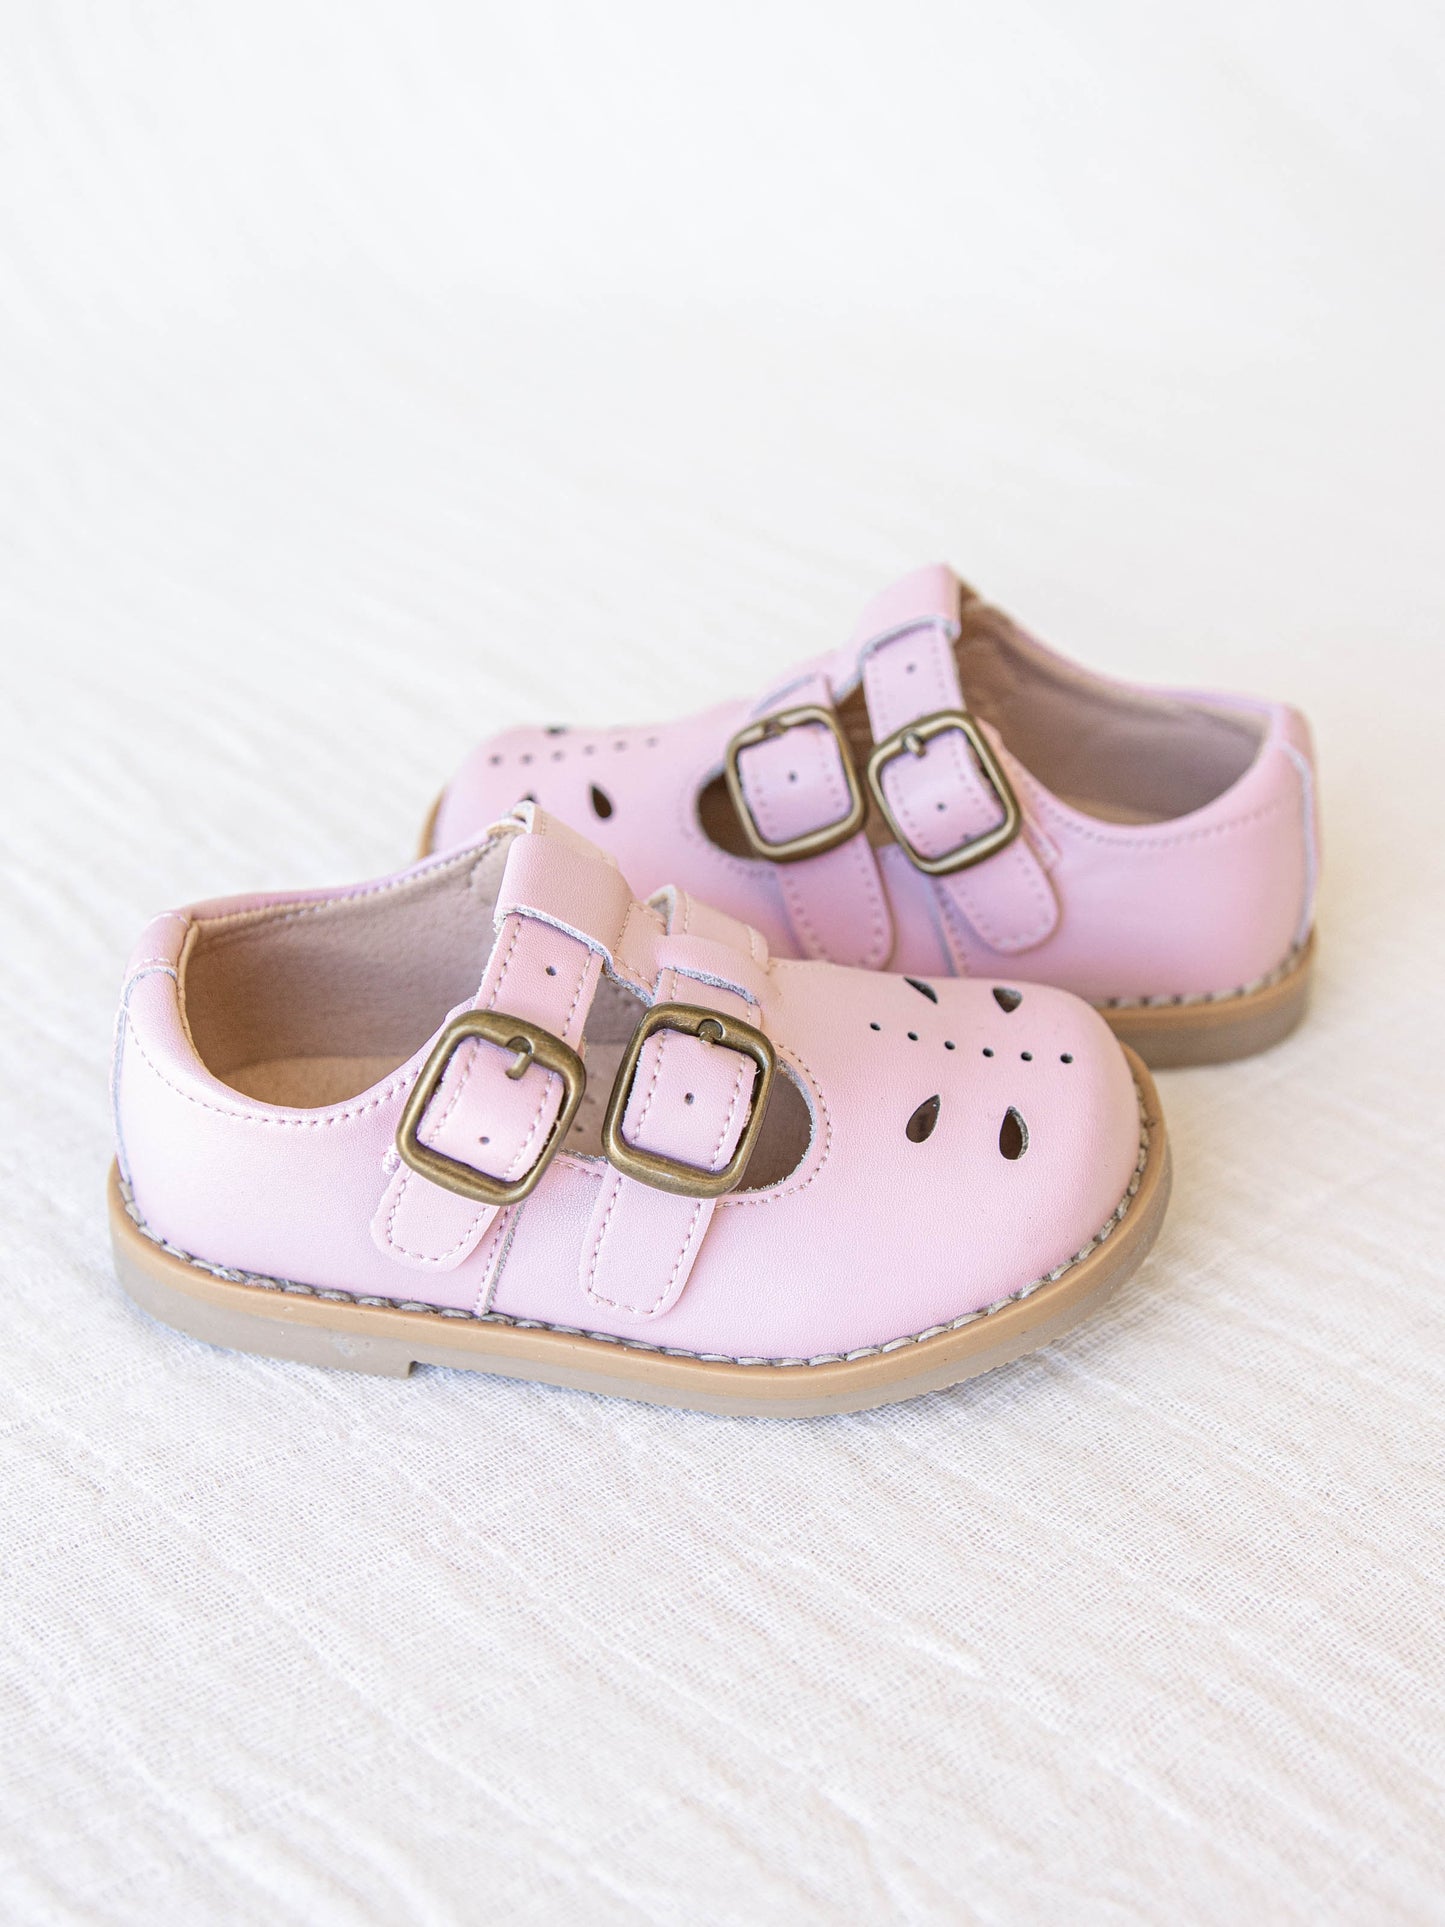 A pair of light pink colored genuine leather rubber soled shoes with two adjustable metal buckles and cut out detail across the toe area in a dragonfly type pattern. 